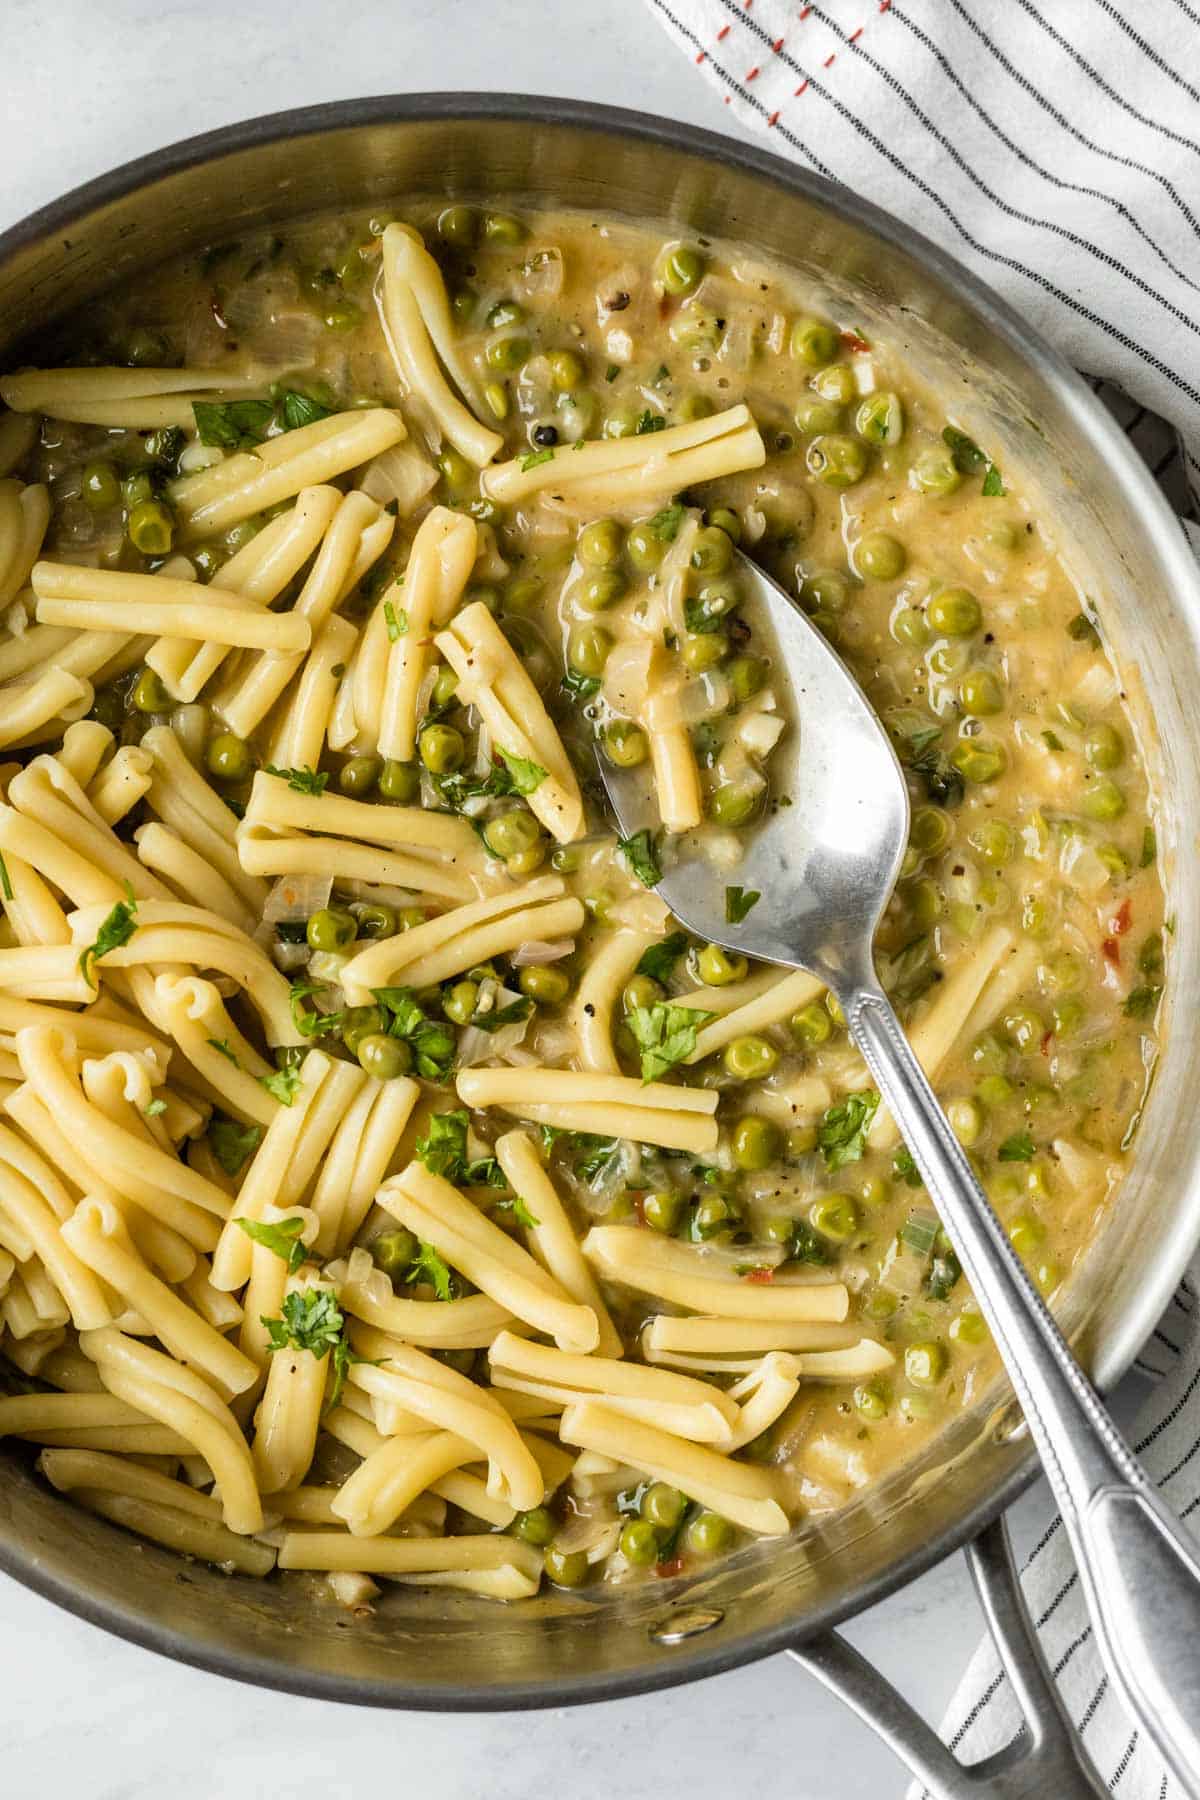 spooning white wine sauce onto pasta in a large saute pan.